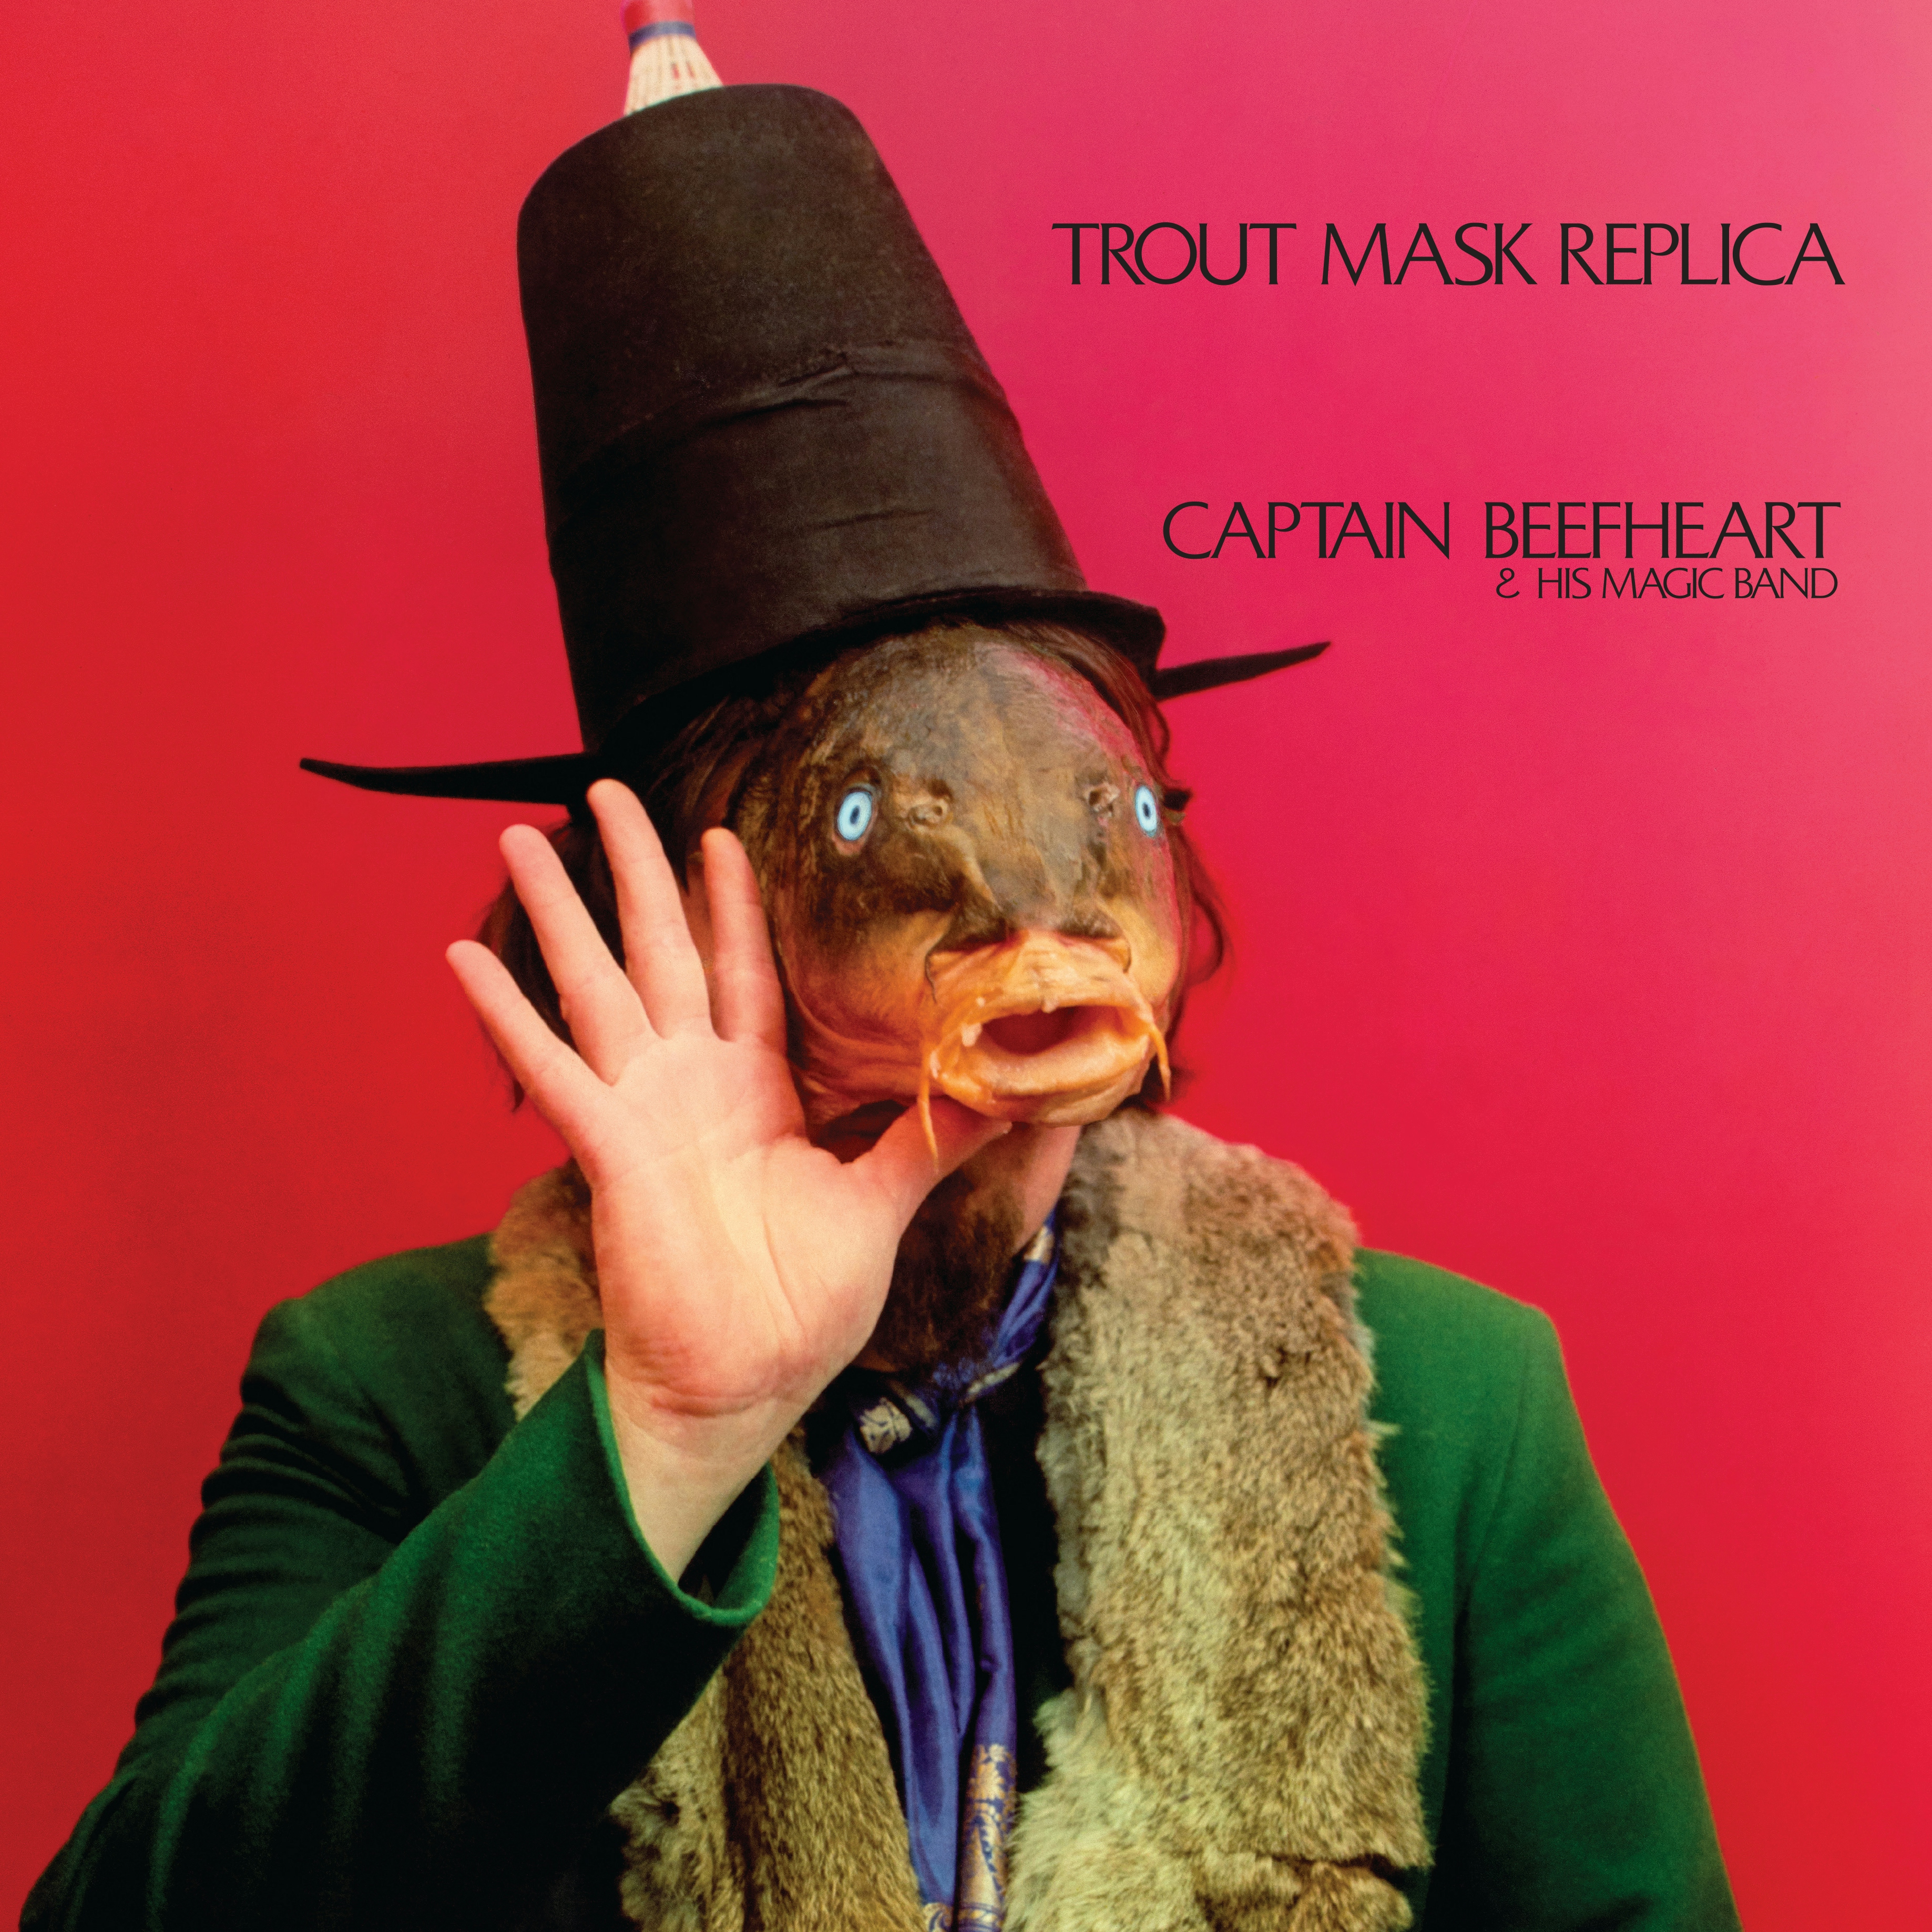 Album artwork for Album artwork for Trout Mask Replica. by Captain Beefheart and His Magic Band by Trout Mask Replica. - Captain Beefheart and His Magic Band